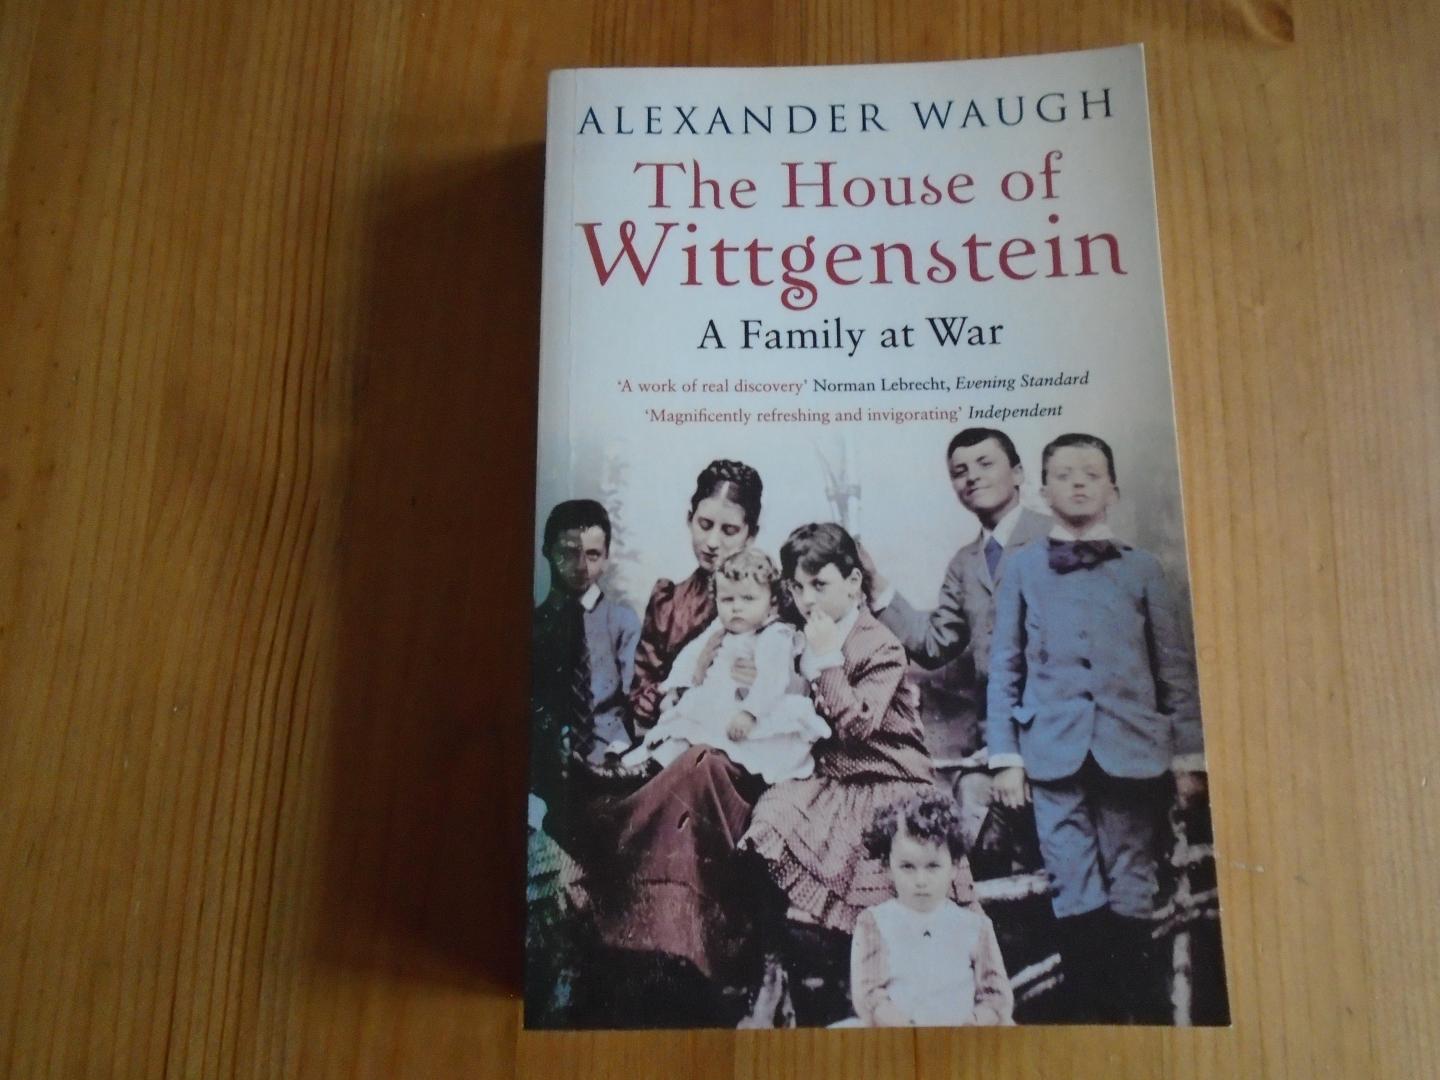 Waugh, Alexander - The House of Wittgenstein - A Family at War